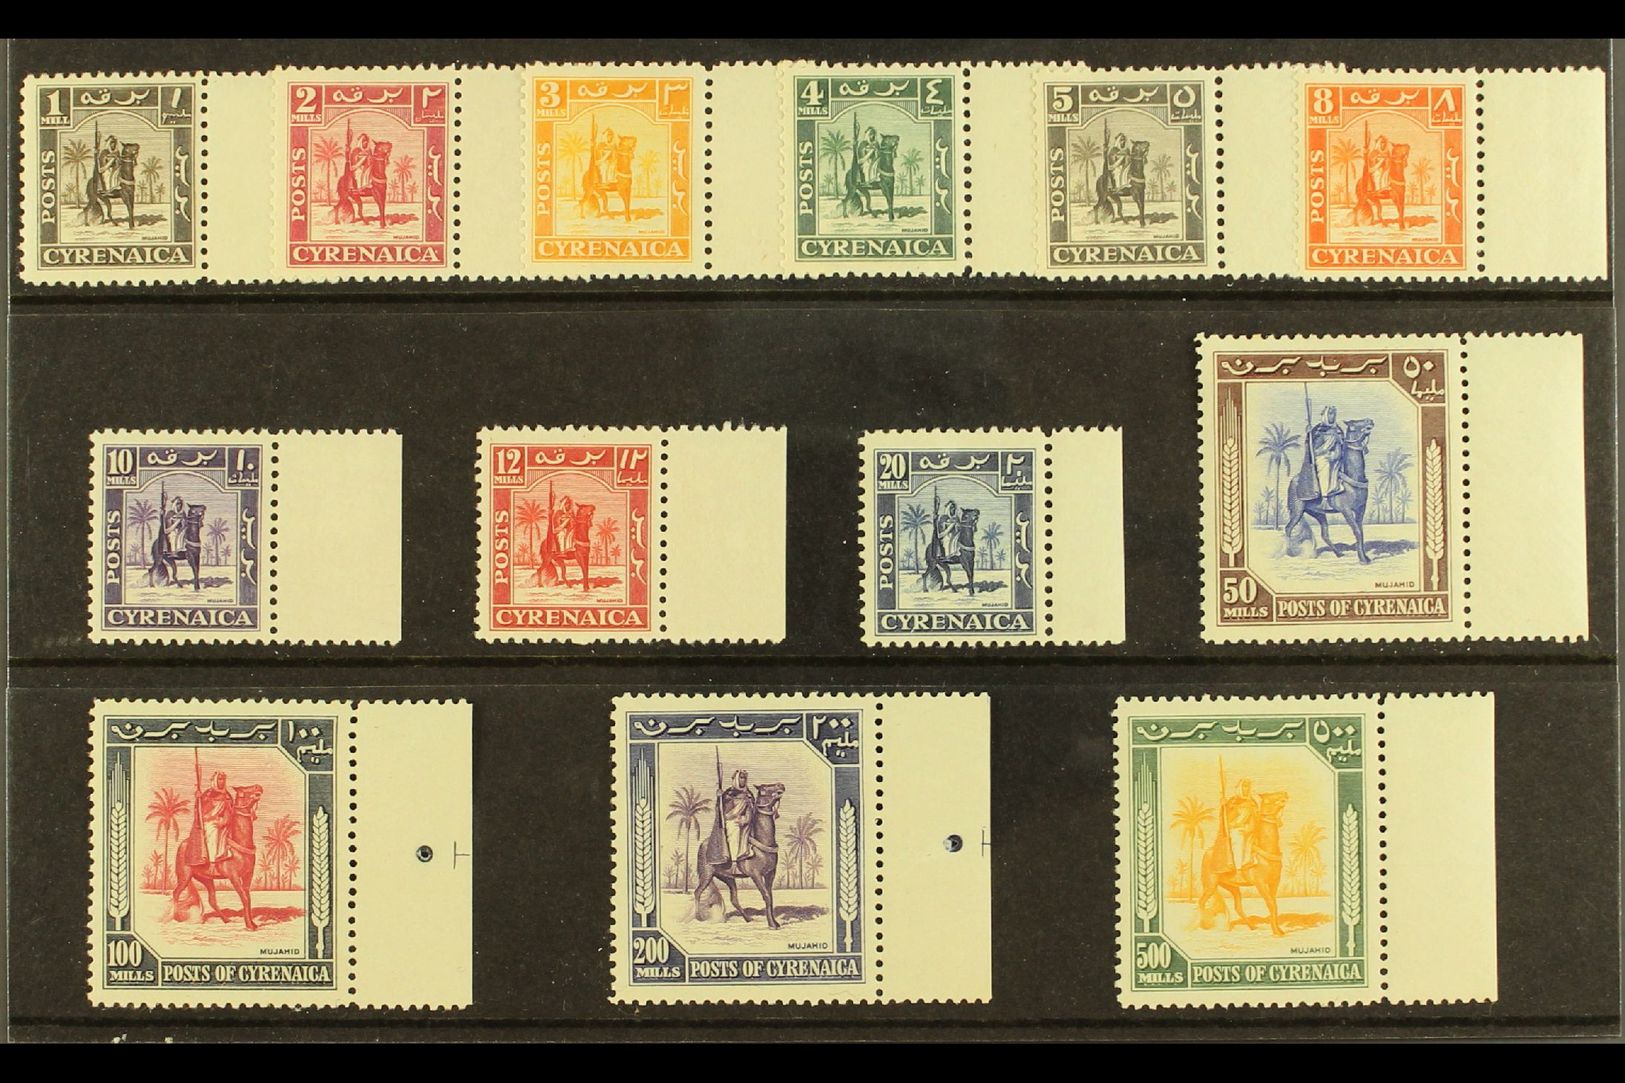 5605 CYRENAICA 1950 "Mounted Warrior" Definitives Complete Set, SG 136/48, Very Fine Never Hinged Mint Matching Marginal - Italian Eastern Africa